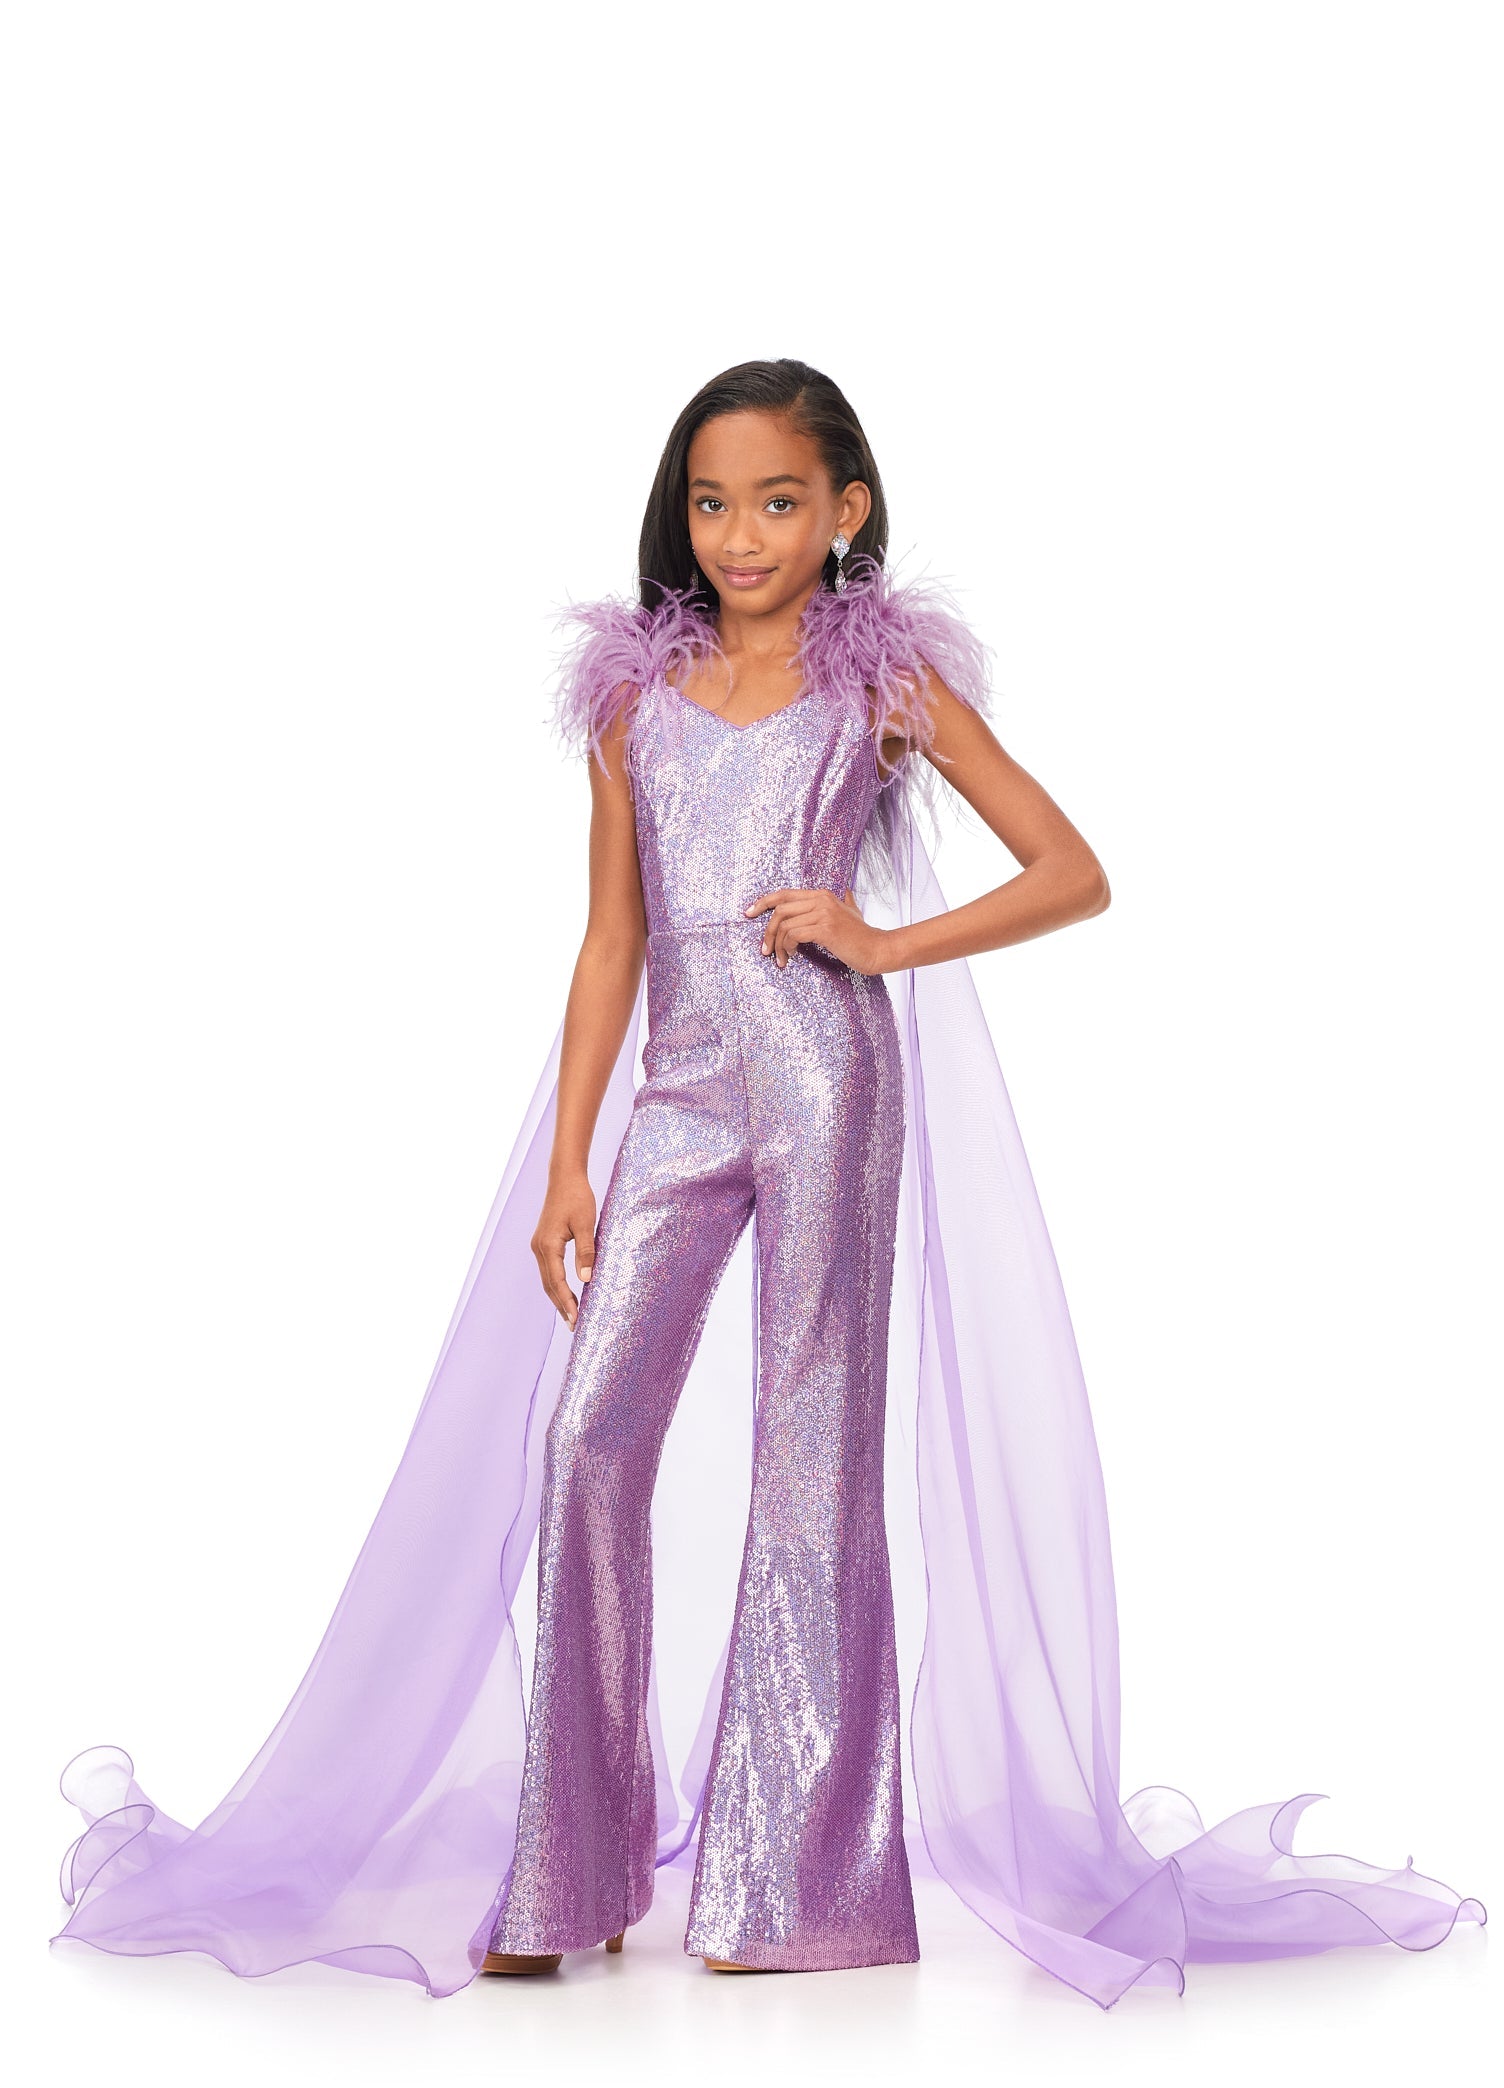 in Stock Ashley Lauren Kids 8174 Size 4,8,10,12,14 Orchid Girls Sequin Jumpsuit Cape Pageant Fun Fashion 14 / Orchid